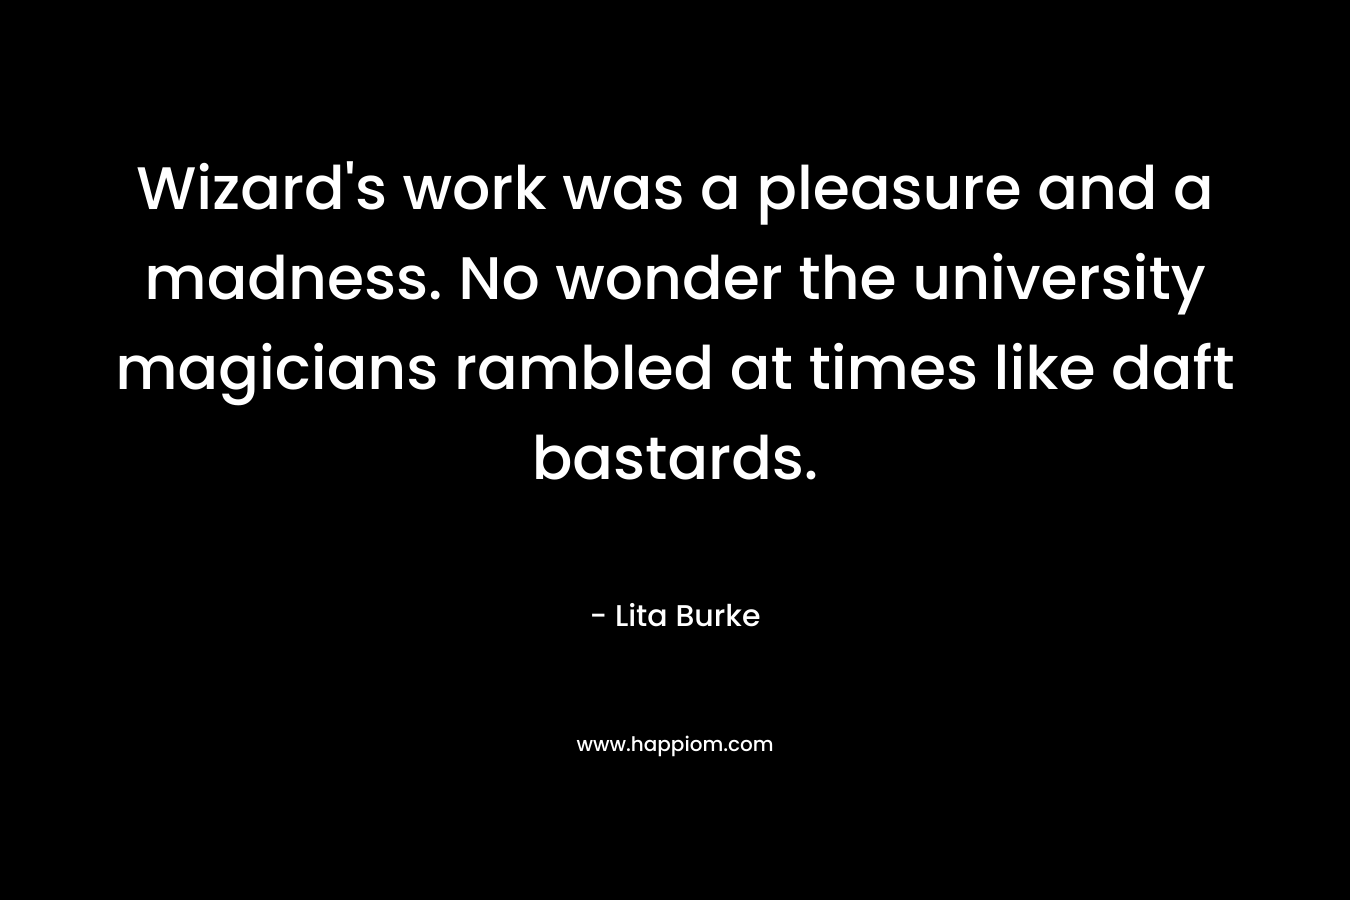 Wizard’s work was a pleasure and a madness. No wonder the university magicians rambled at times like daft bastards. – Lita Burke